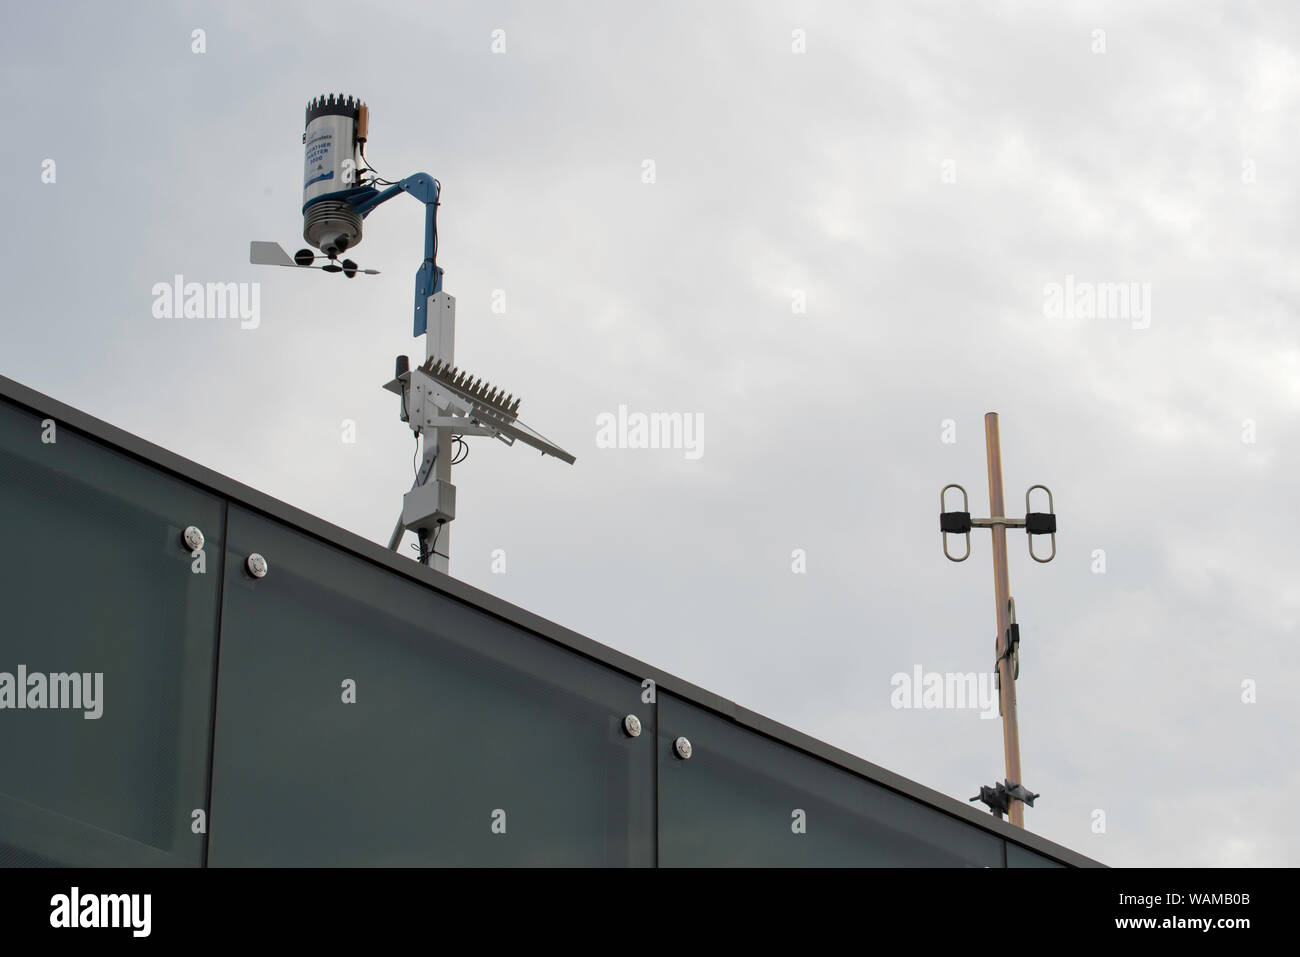 A professional standard, remote controlled remote weather station mounted on a roof line at Sydney's Barangaroo Reserve Stock Photo